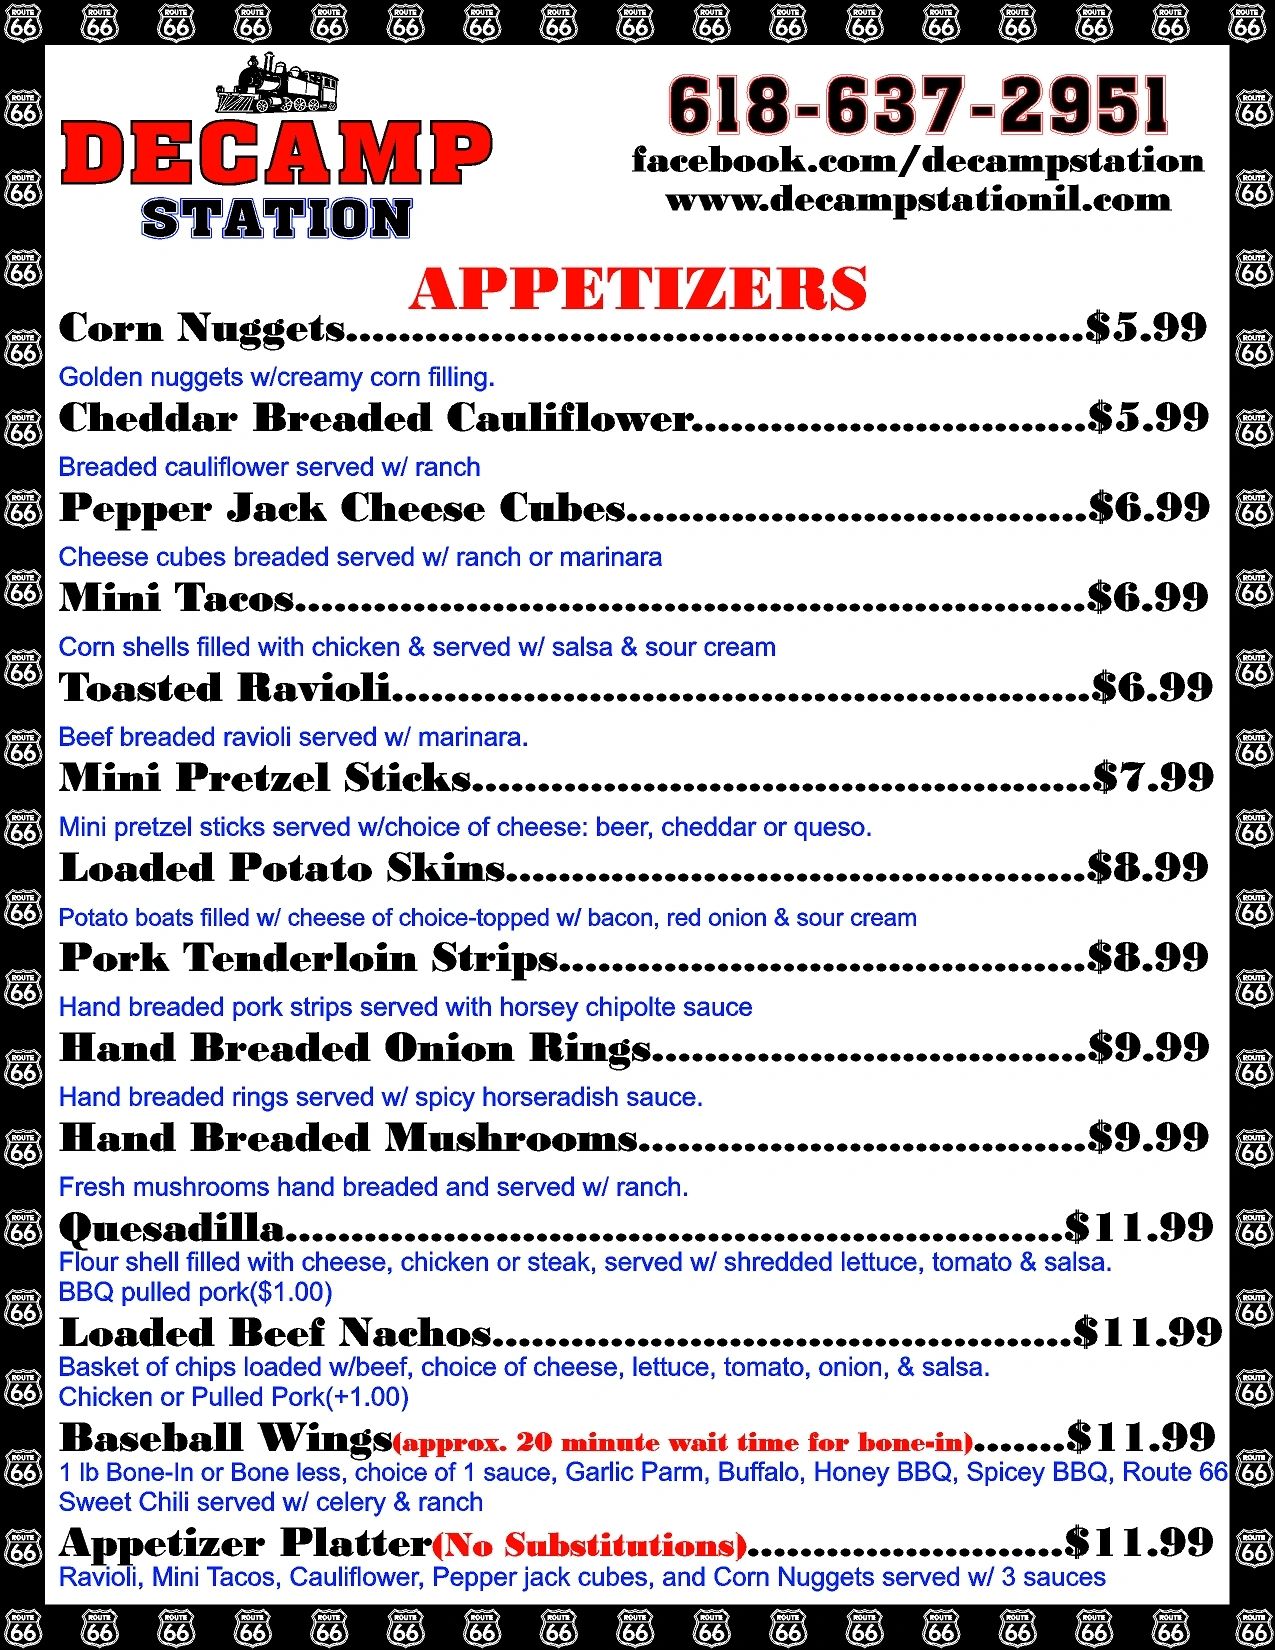 A Menu Page of Decamp Station in White Color